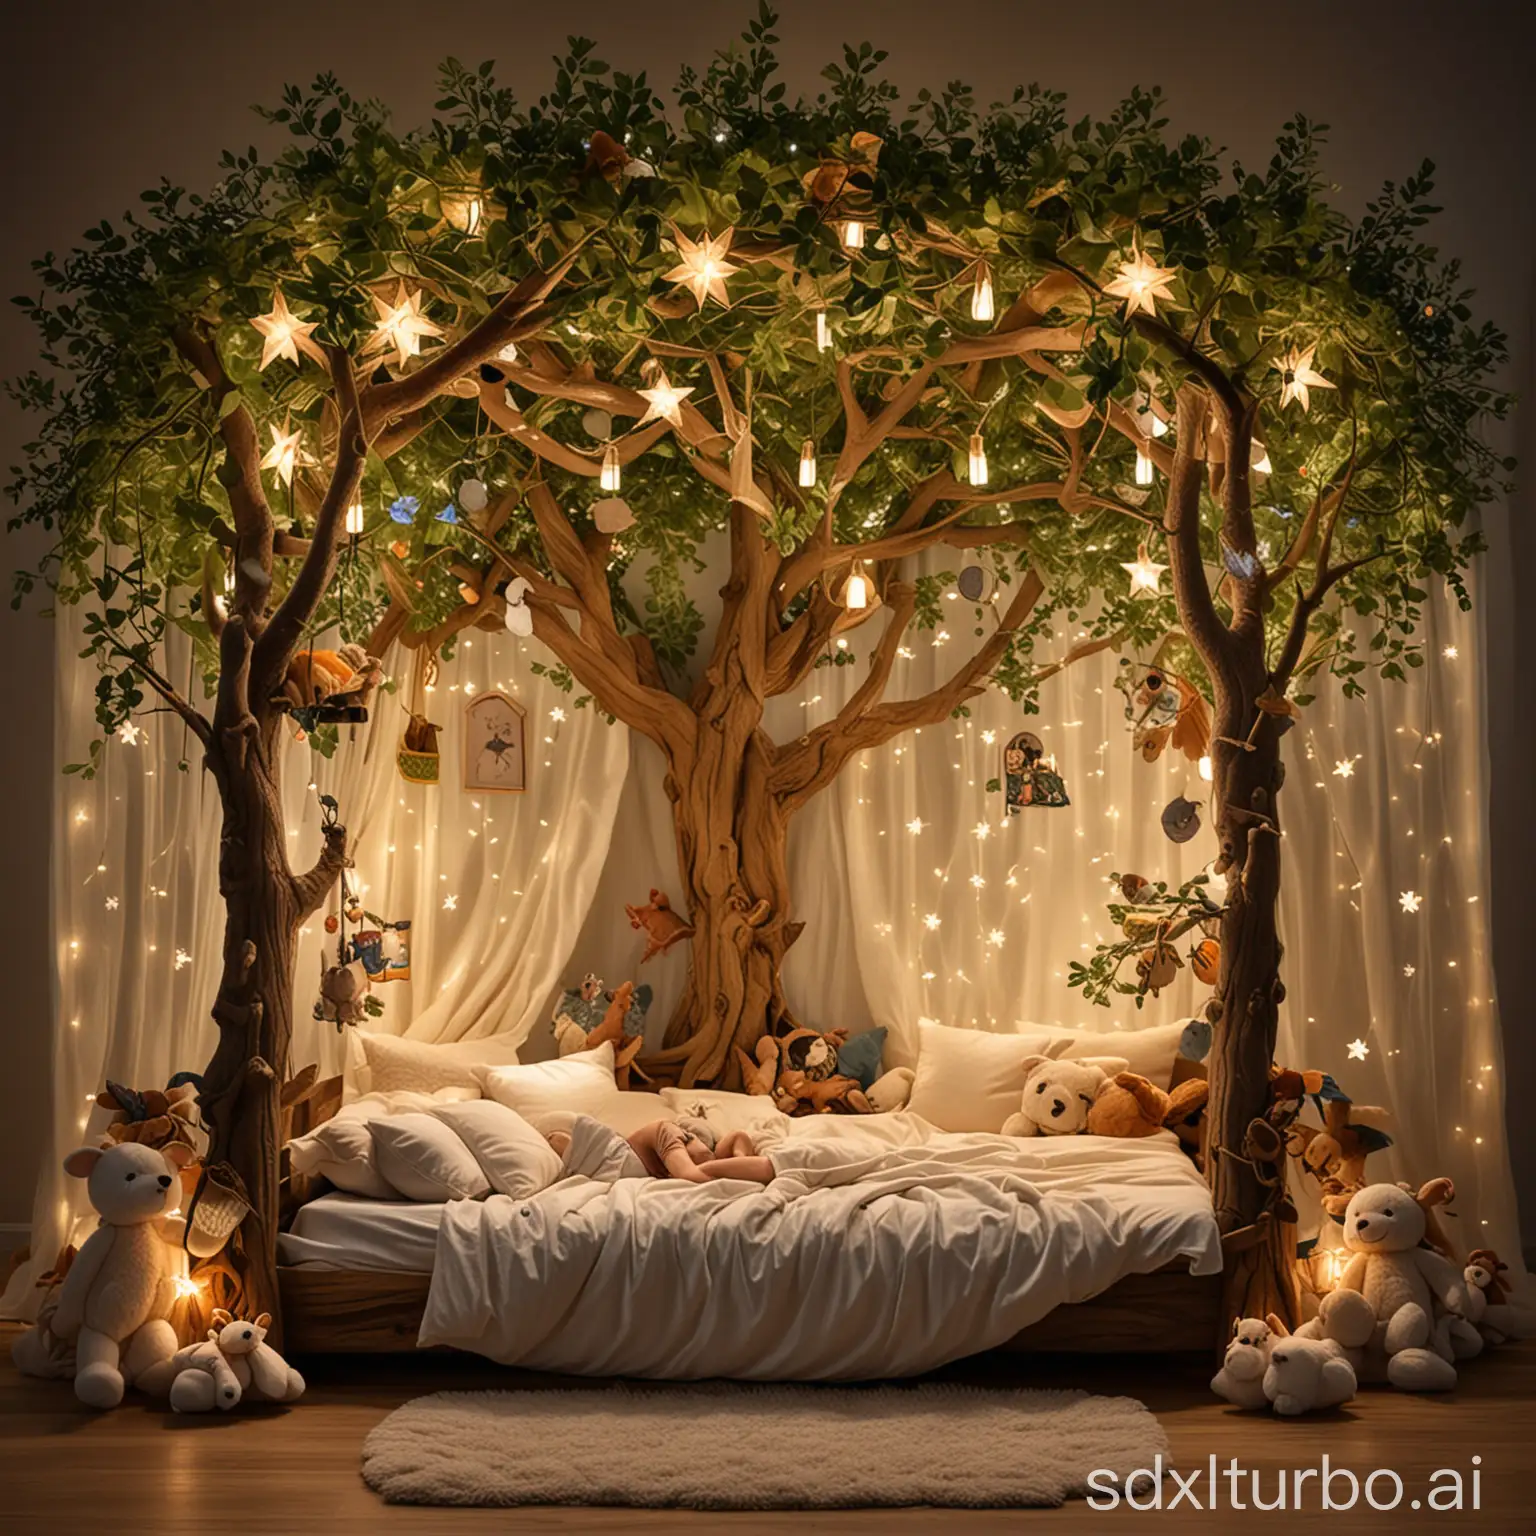 A boy is sleeping in a bed designed like a treehouse. Surrounded by plush animals and soft pillows shaped like leaves and flowers, he dreams of adventures in the magical fairy tale forest. LED star lights twinkle above him, attached to the branches.